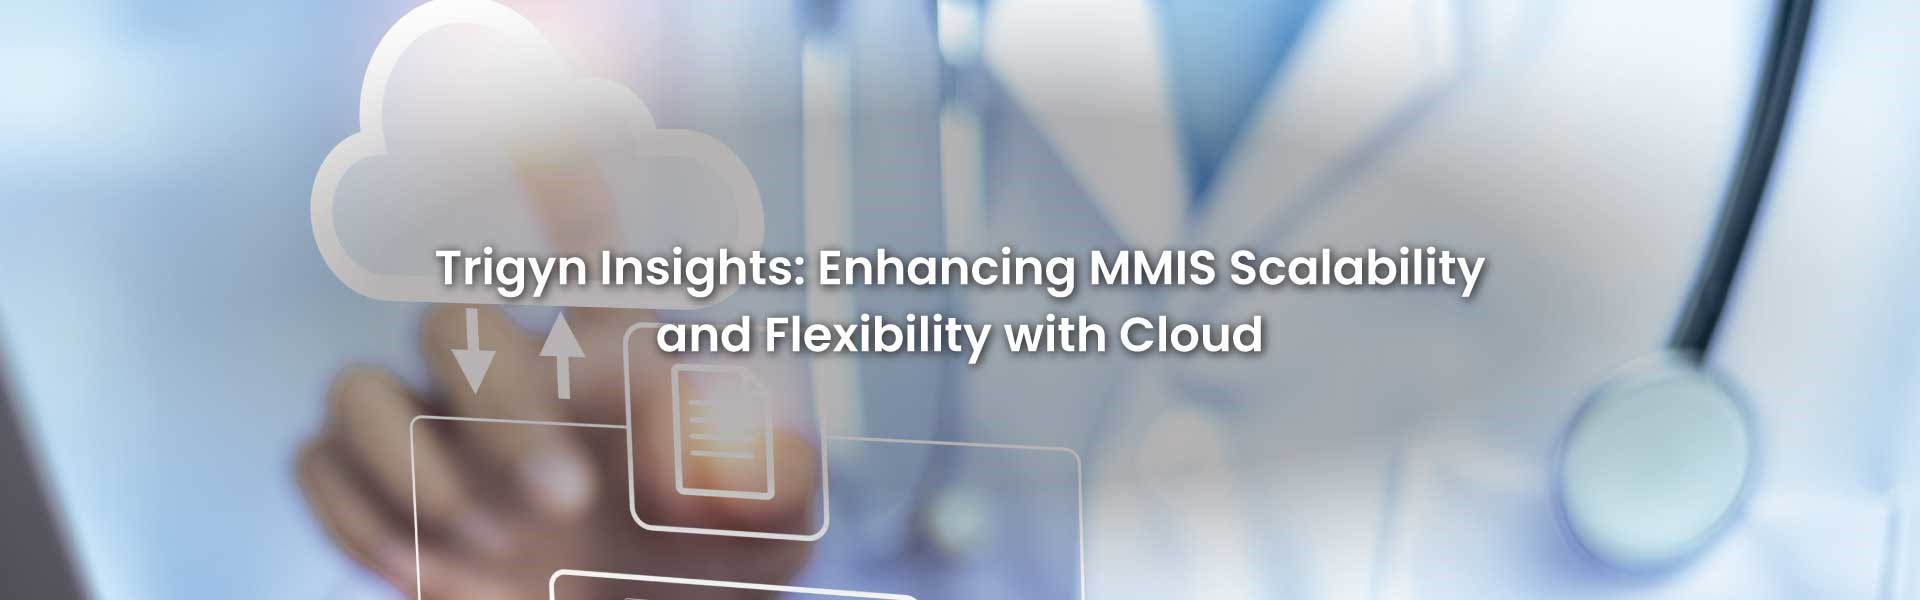 Enhancing MMIS Scalability and Flexibility with Cloud